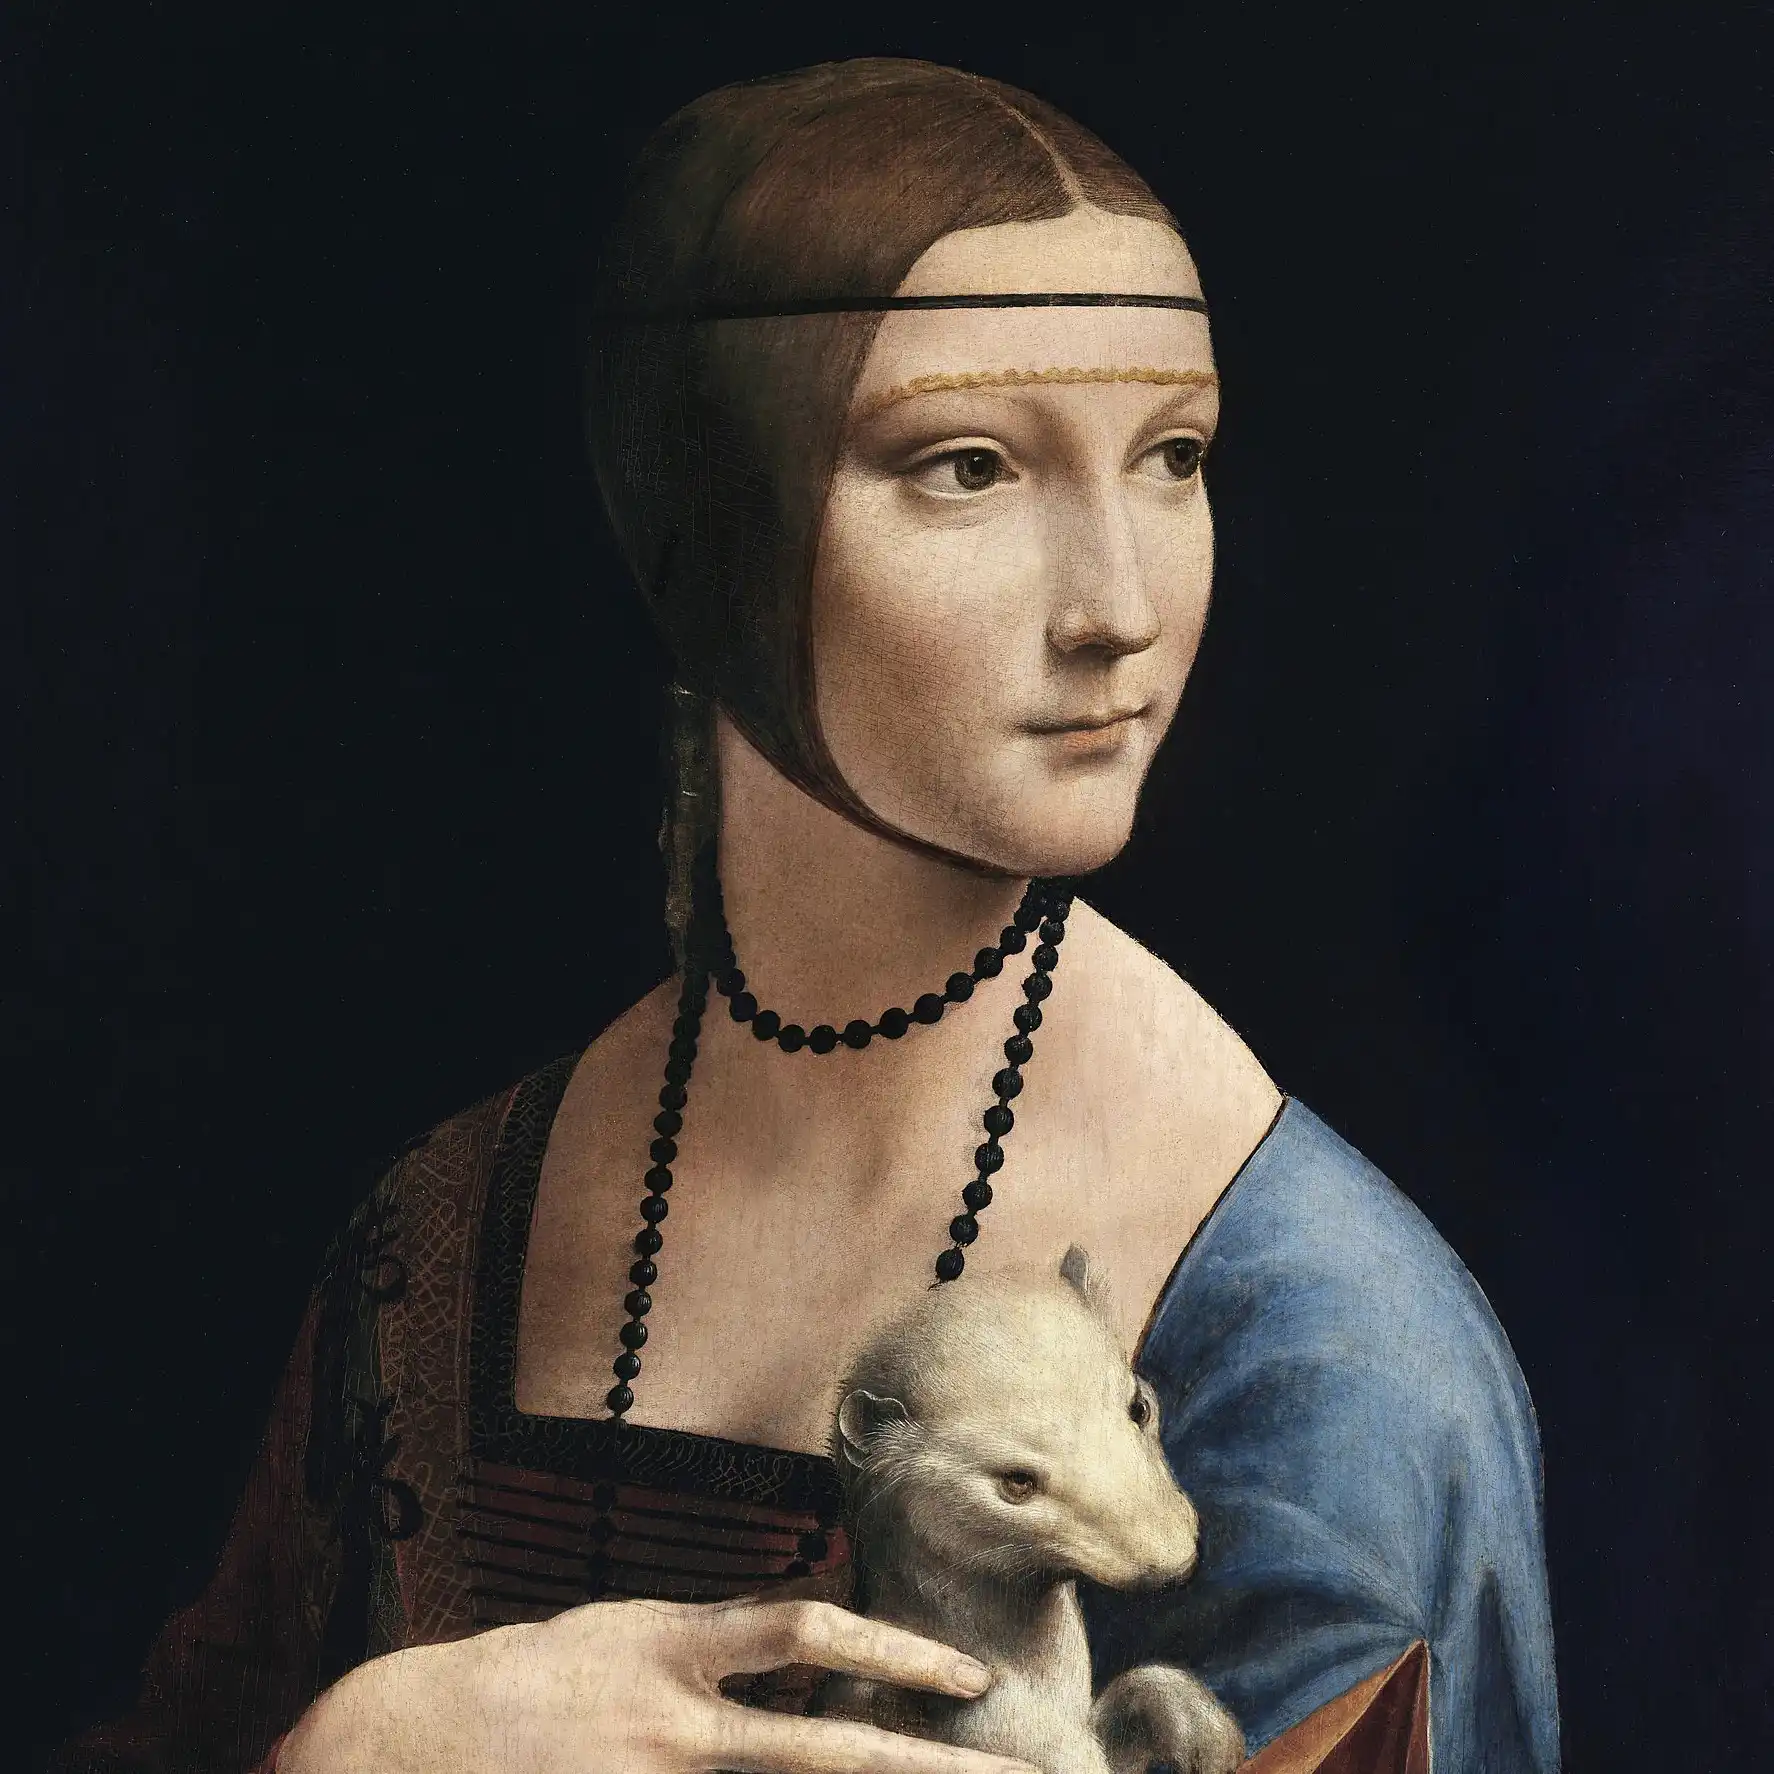 Lady with an Ermine details